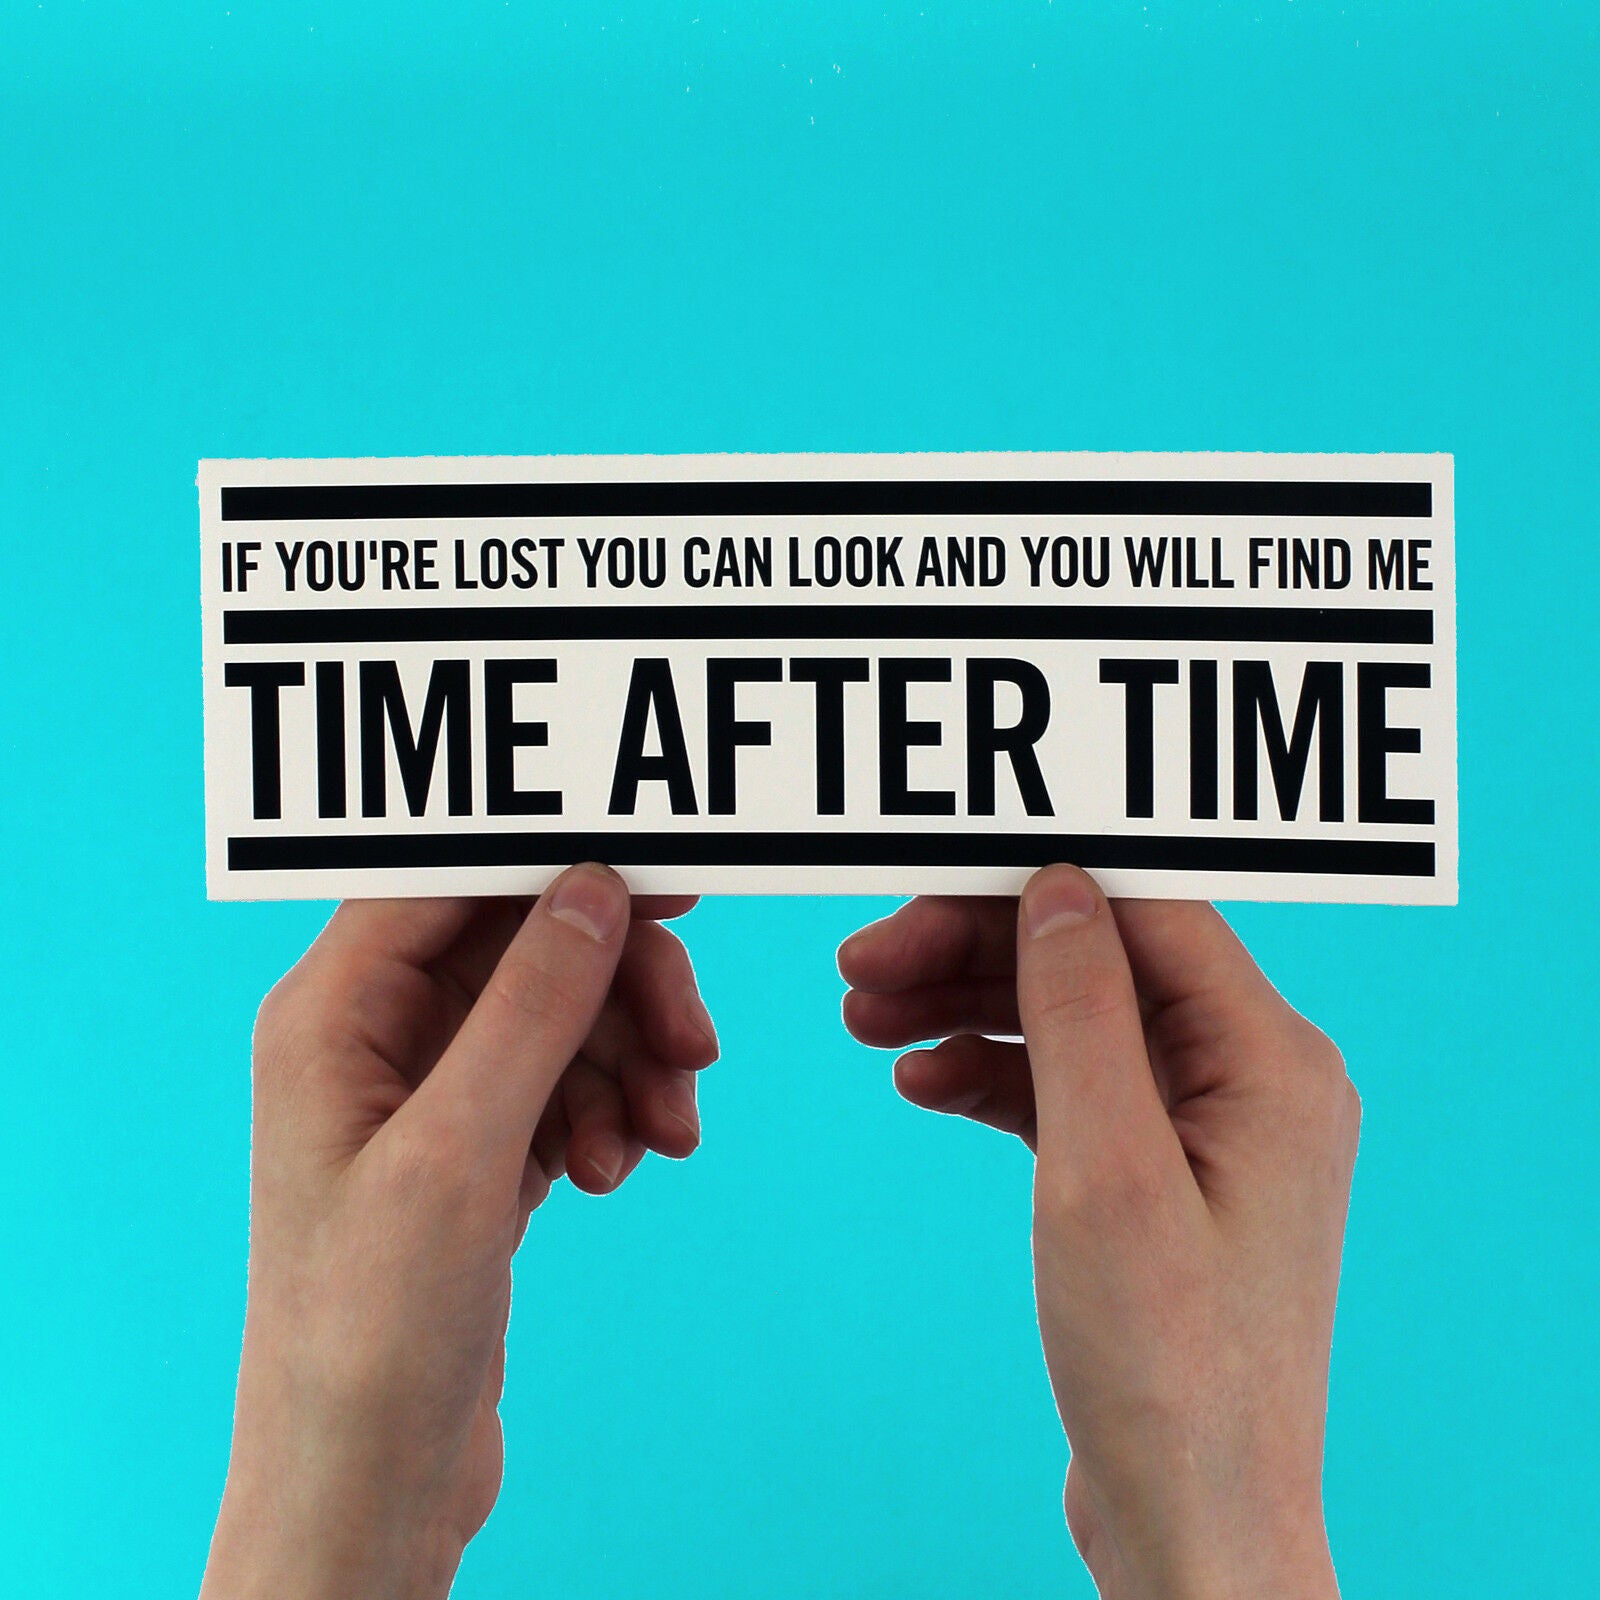  "If you're lost, you can look and you will find me  Time after Time"